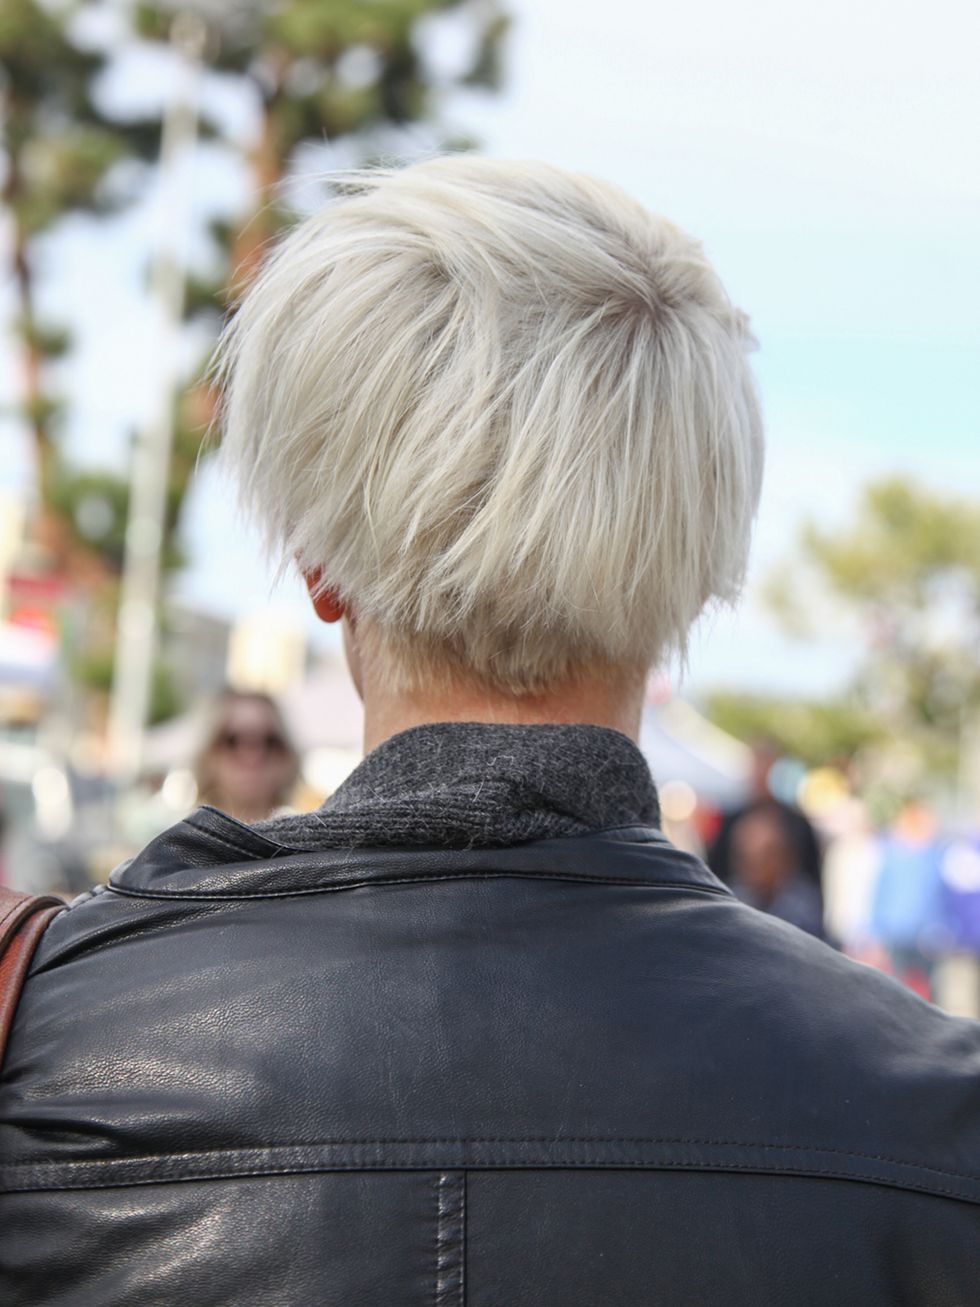 Hairstyle, Style, Jacket, Street fashion, Blond, Back, Leather jacket, Hair coloring, Bag, Brown hair, 